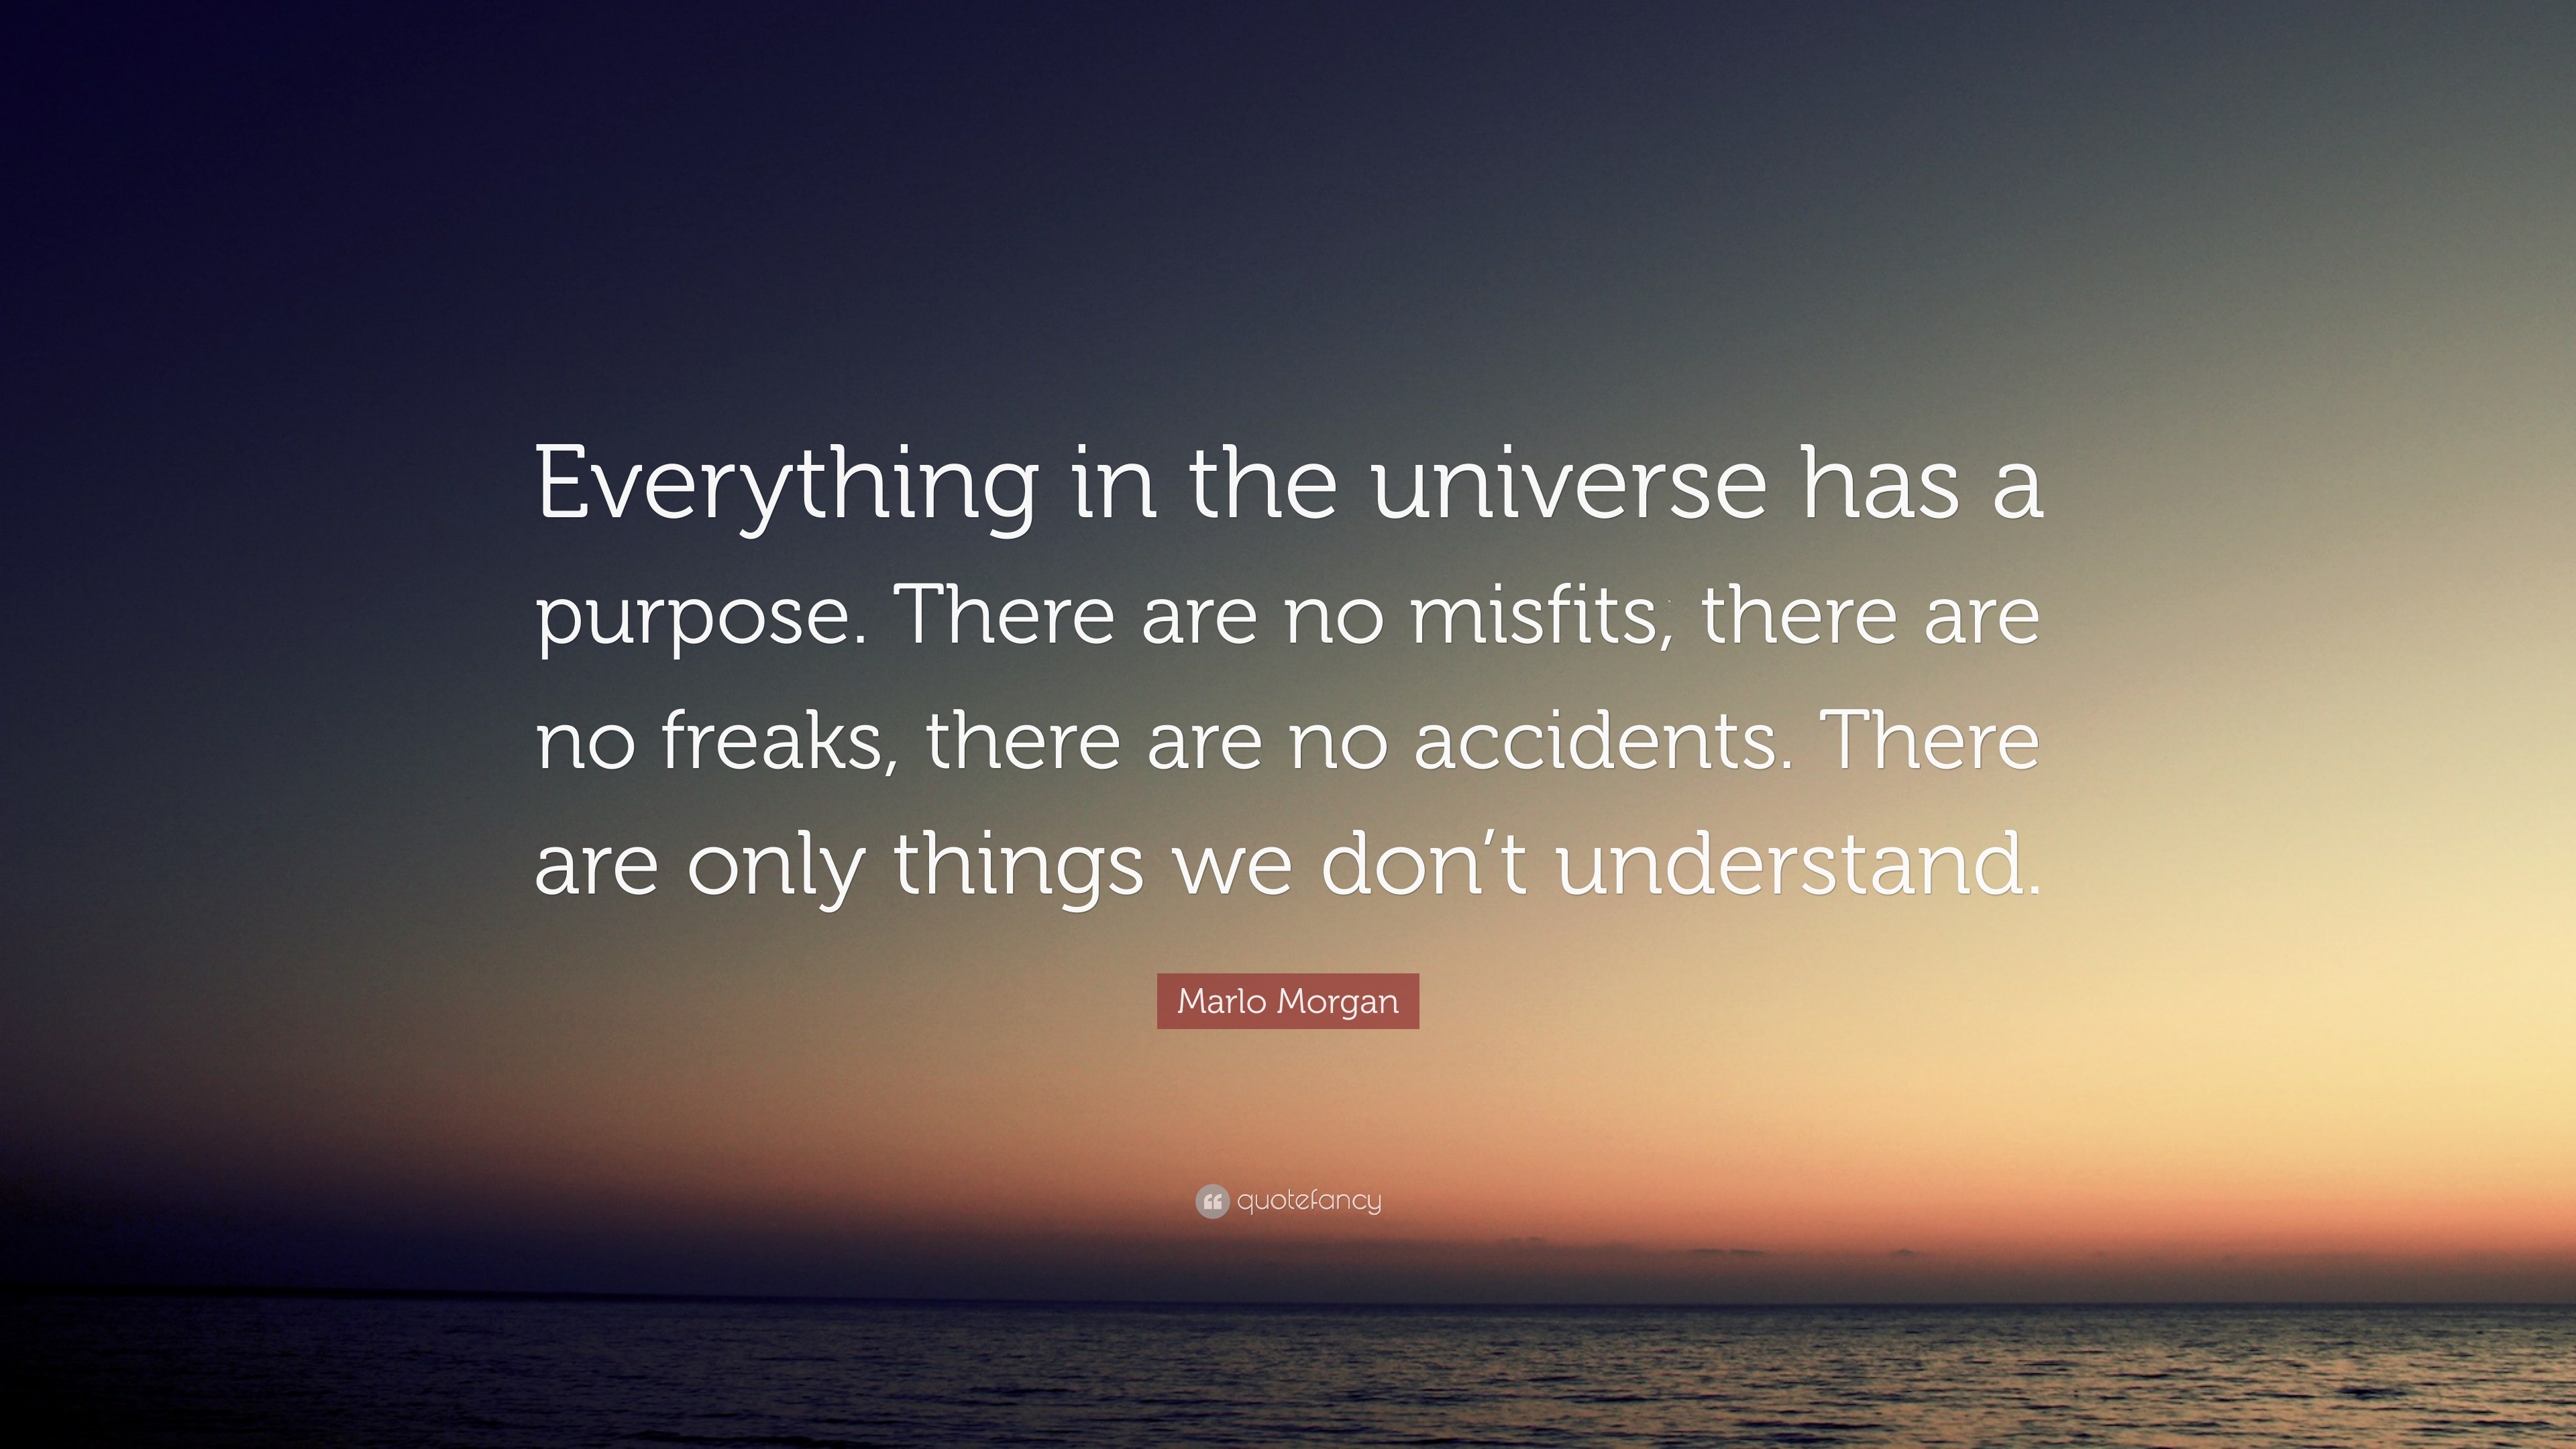 Marlo Morgan Quote: “Everything in the universe has a purpose. There ...